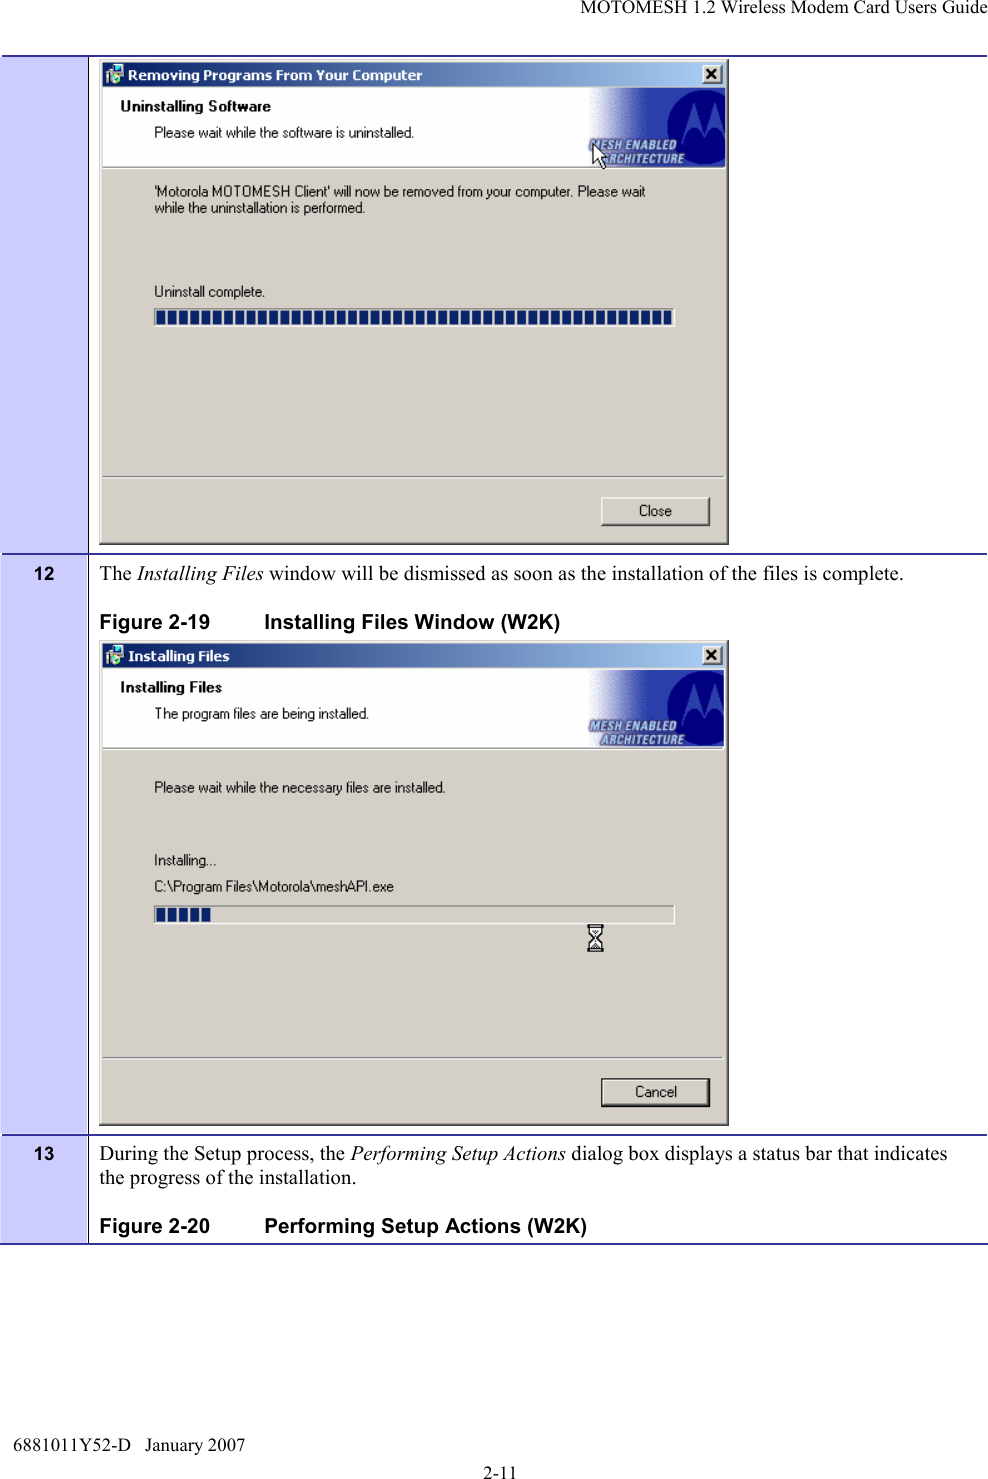 MOTOMESH 1.2 Wireless Modem Card Users Guide 6881011Y52-D   January 2007 2-11  12  The Installing Files window will be dismissed as soon as the installation of the files is complete. Figure 2-19  Installing Files Window (W2K)  13  During the Setup process, the Performing Setup Actions dialog box displays a status bar that indicates the progress of the installation. Figure 2-20  Performing Setup Actions (W2K) 